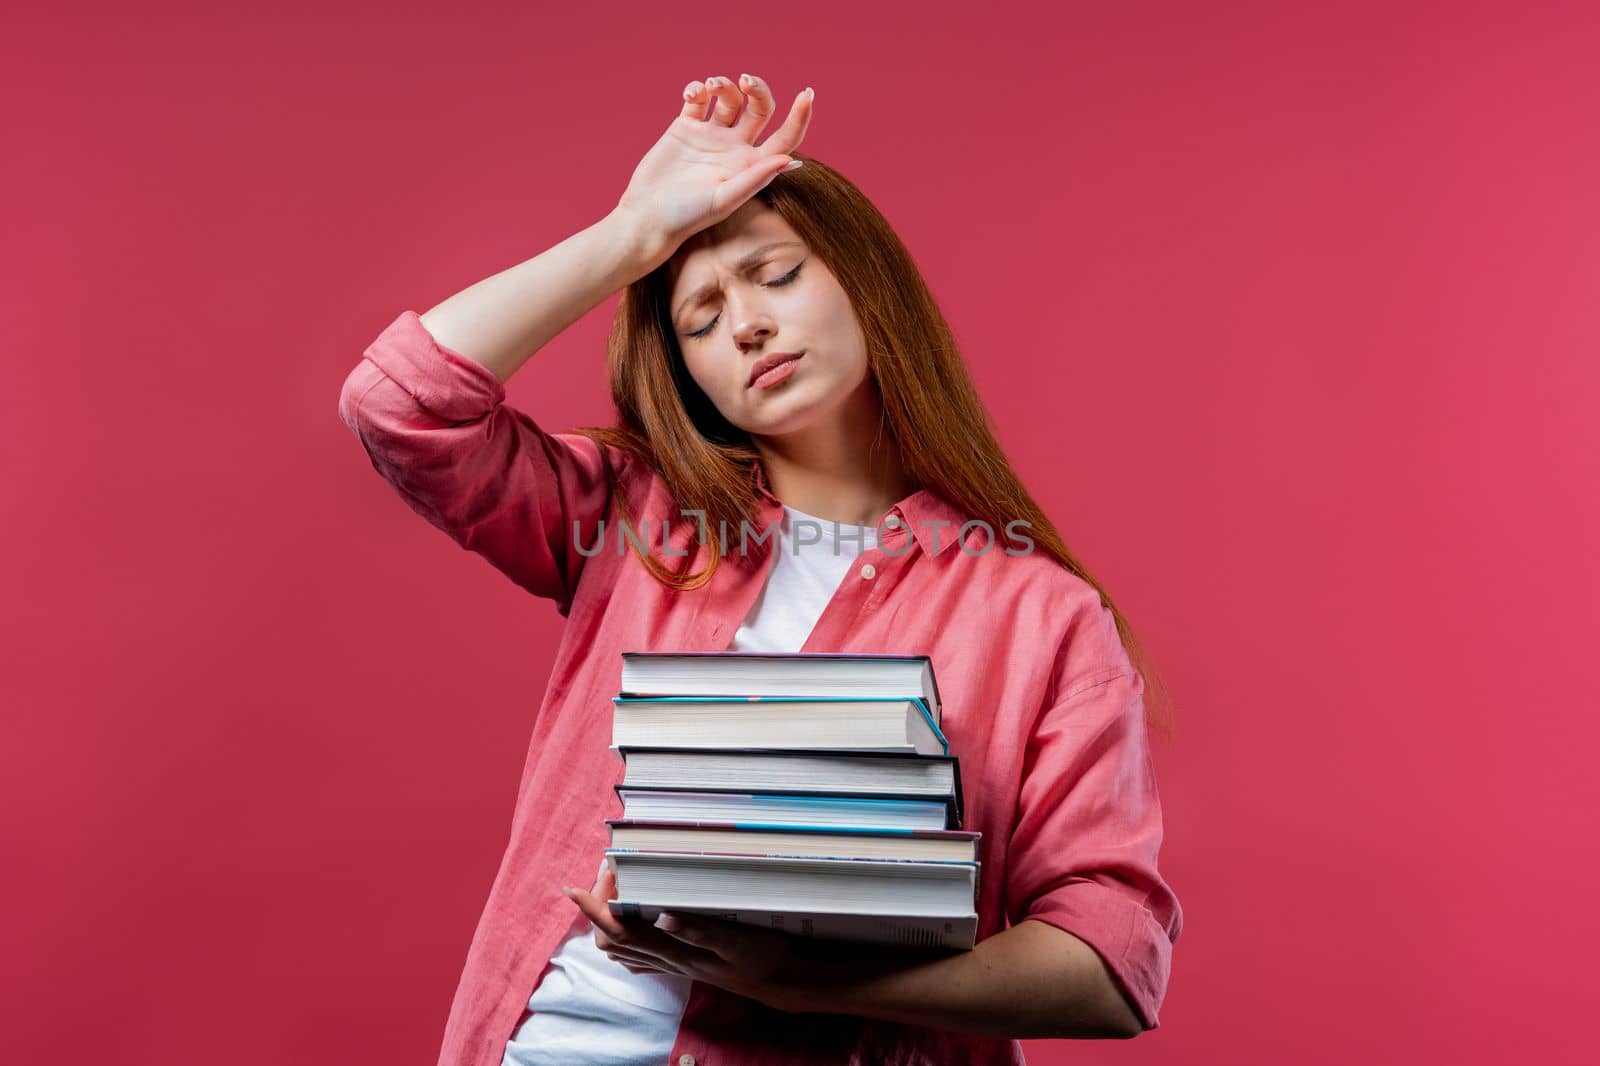 Lazy schoolgirl or student is dissatisfied with amount of books homework on pink background. Girl with ginger hair in displeasure, she is annoyed, discouraged frustrated by studies. High quality photo